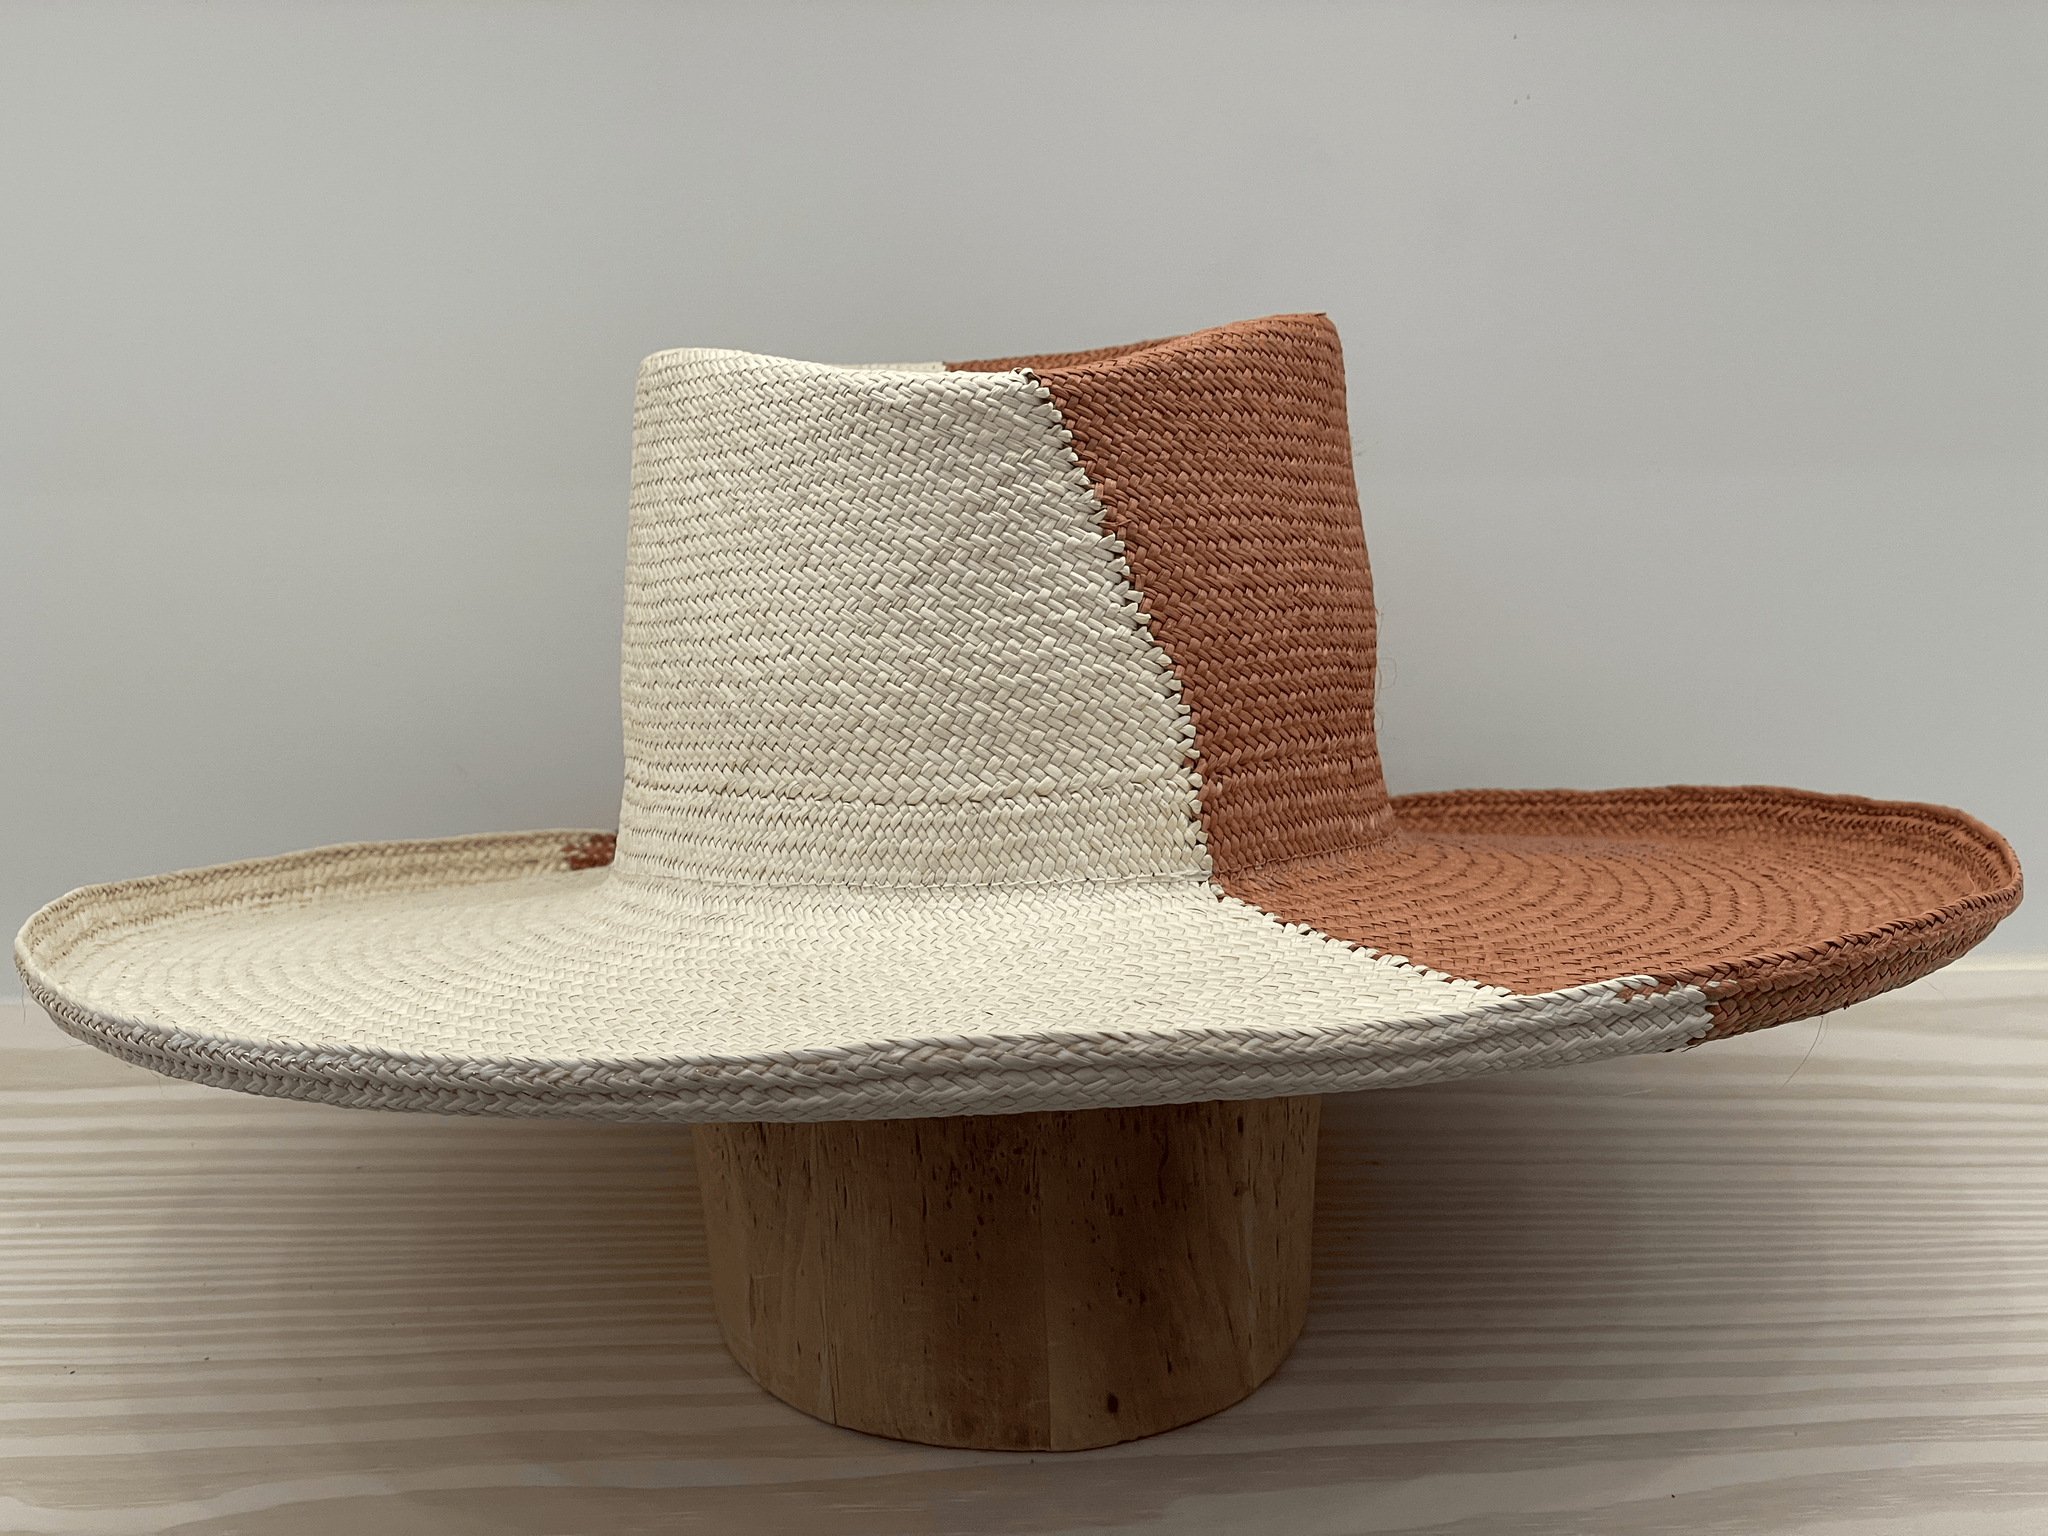 Drury Lane Hat in Cafe/ Ivory (Sold Out)